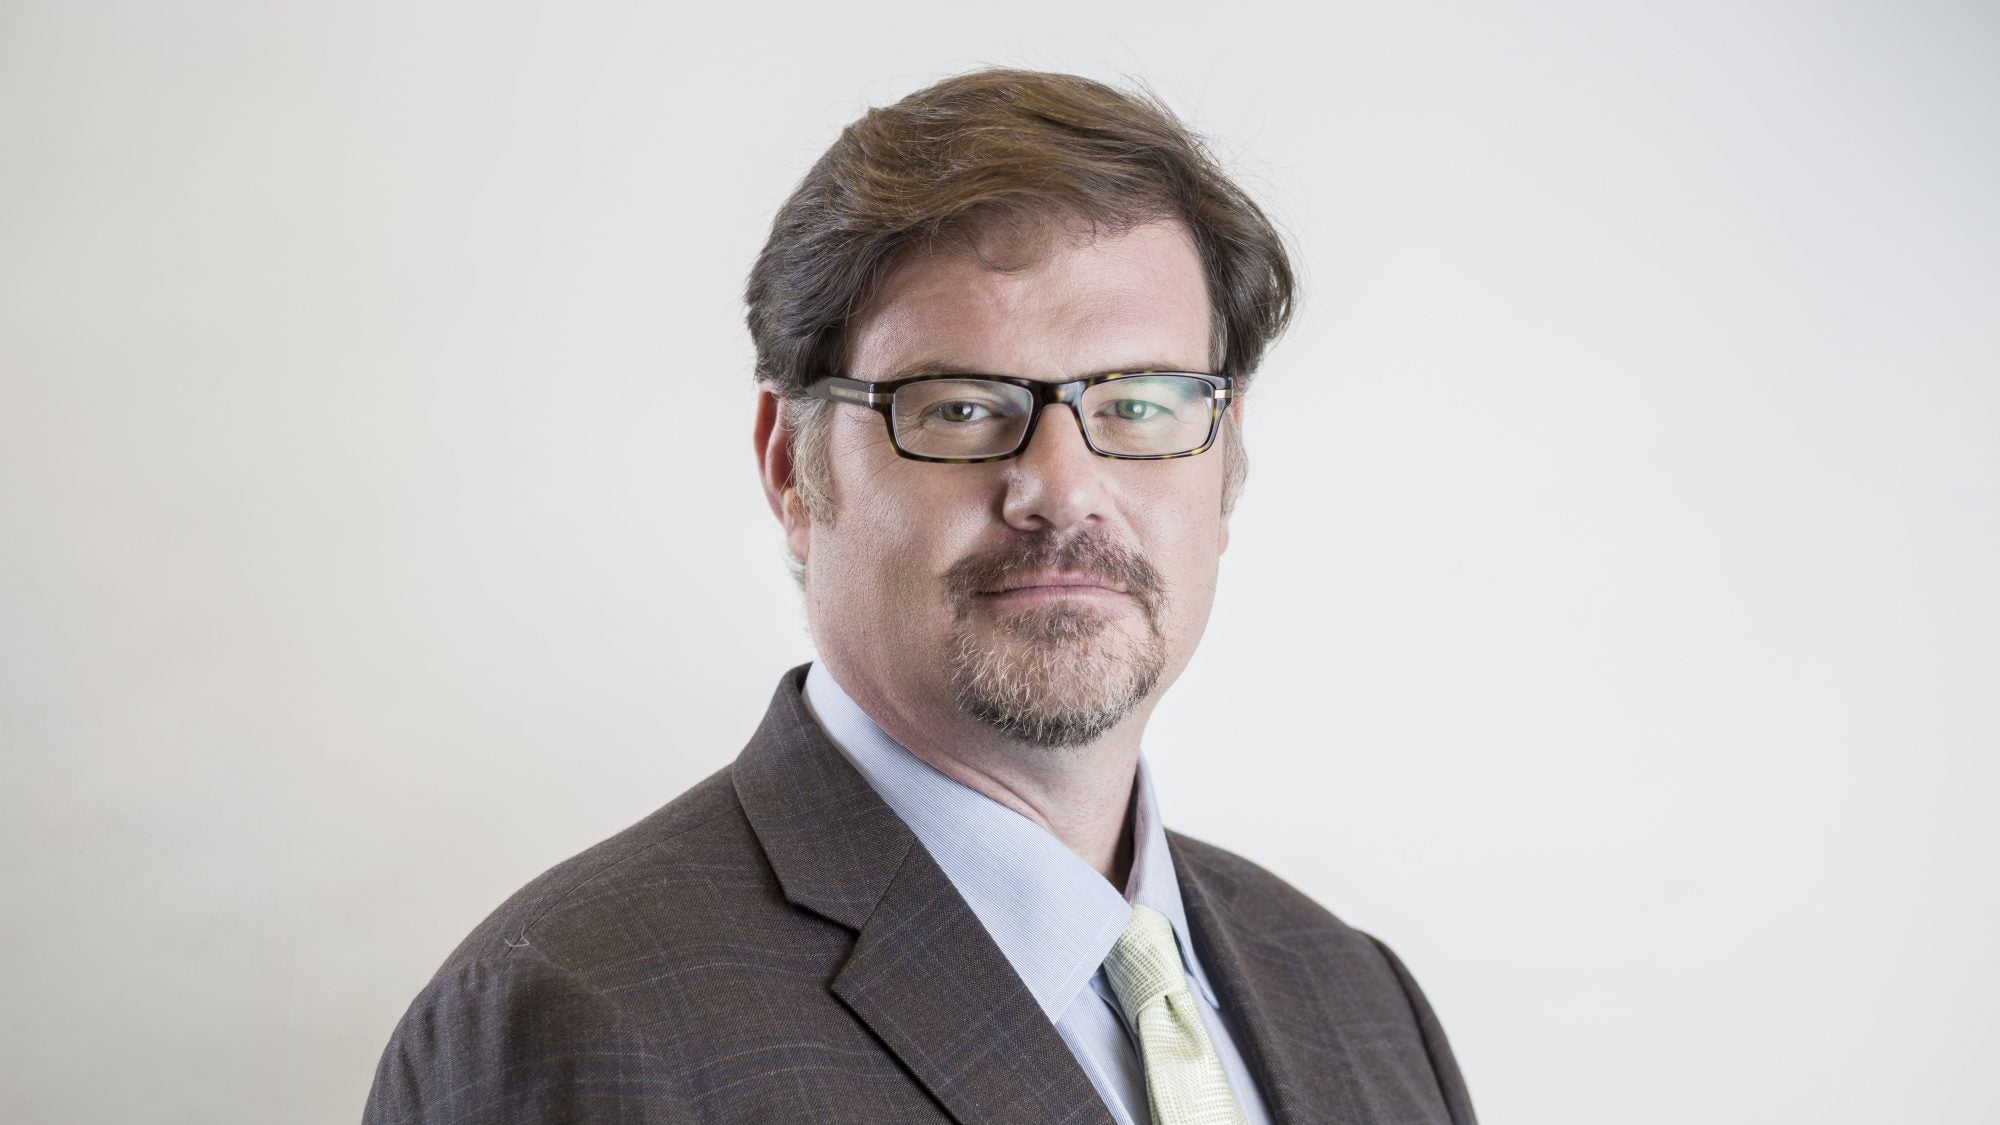 Jonah Goldberg, in suit and wearing glasses, looking at camera.